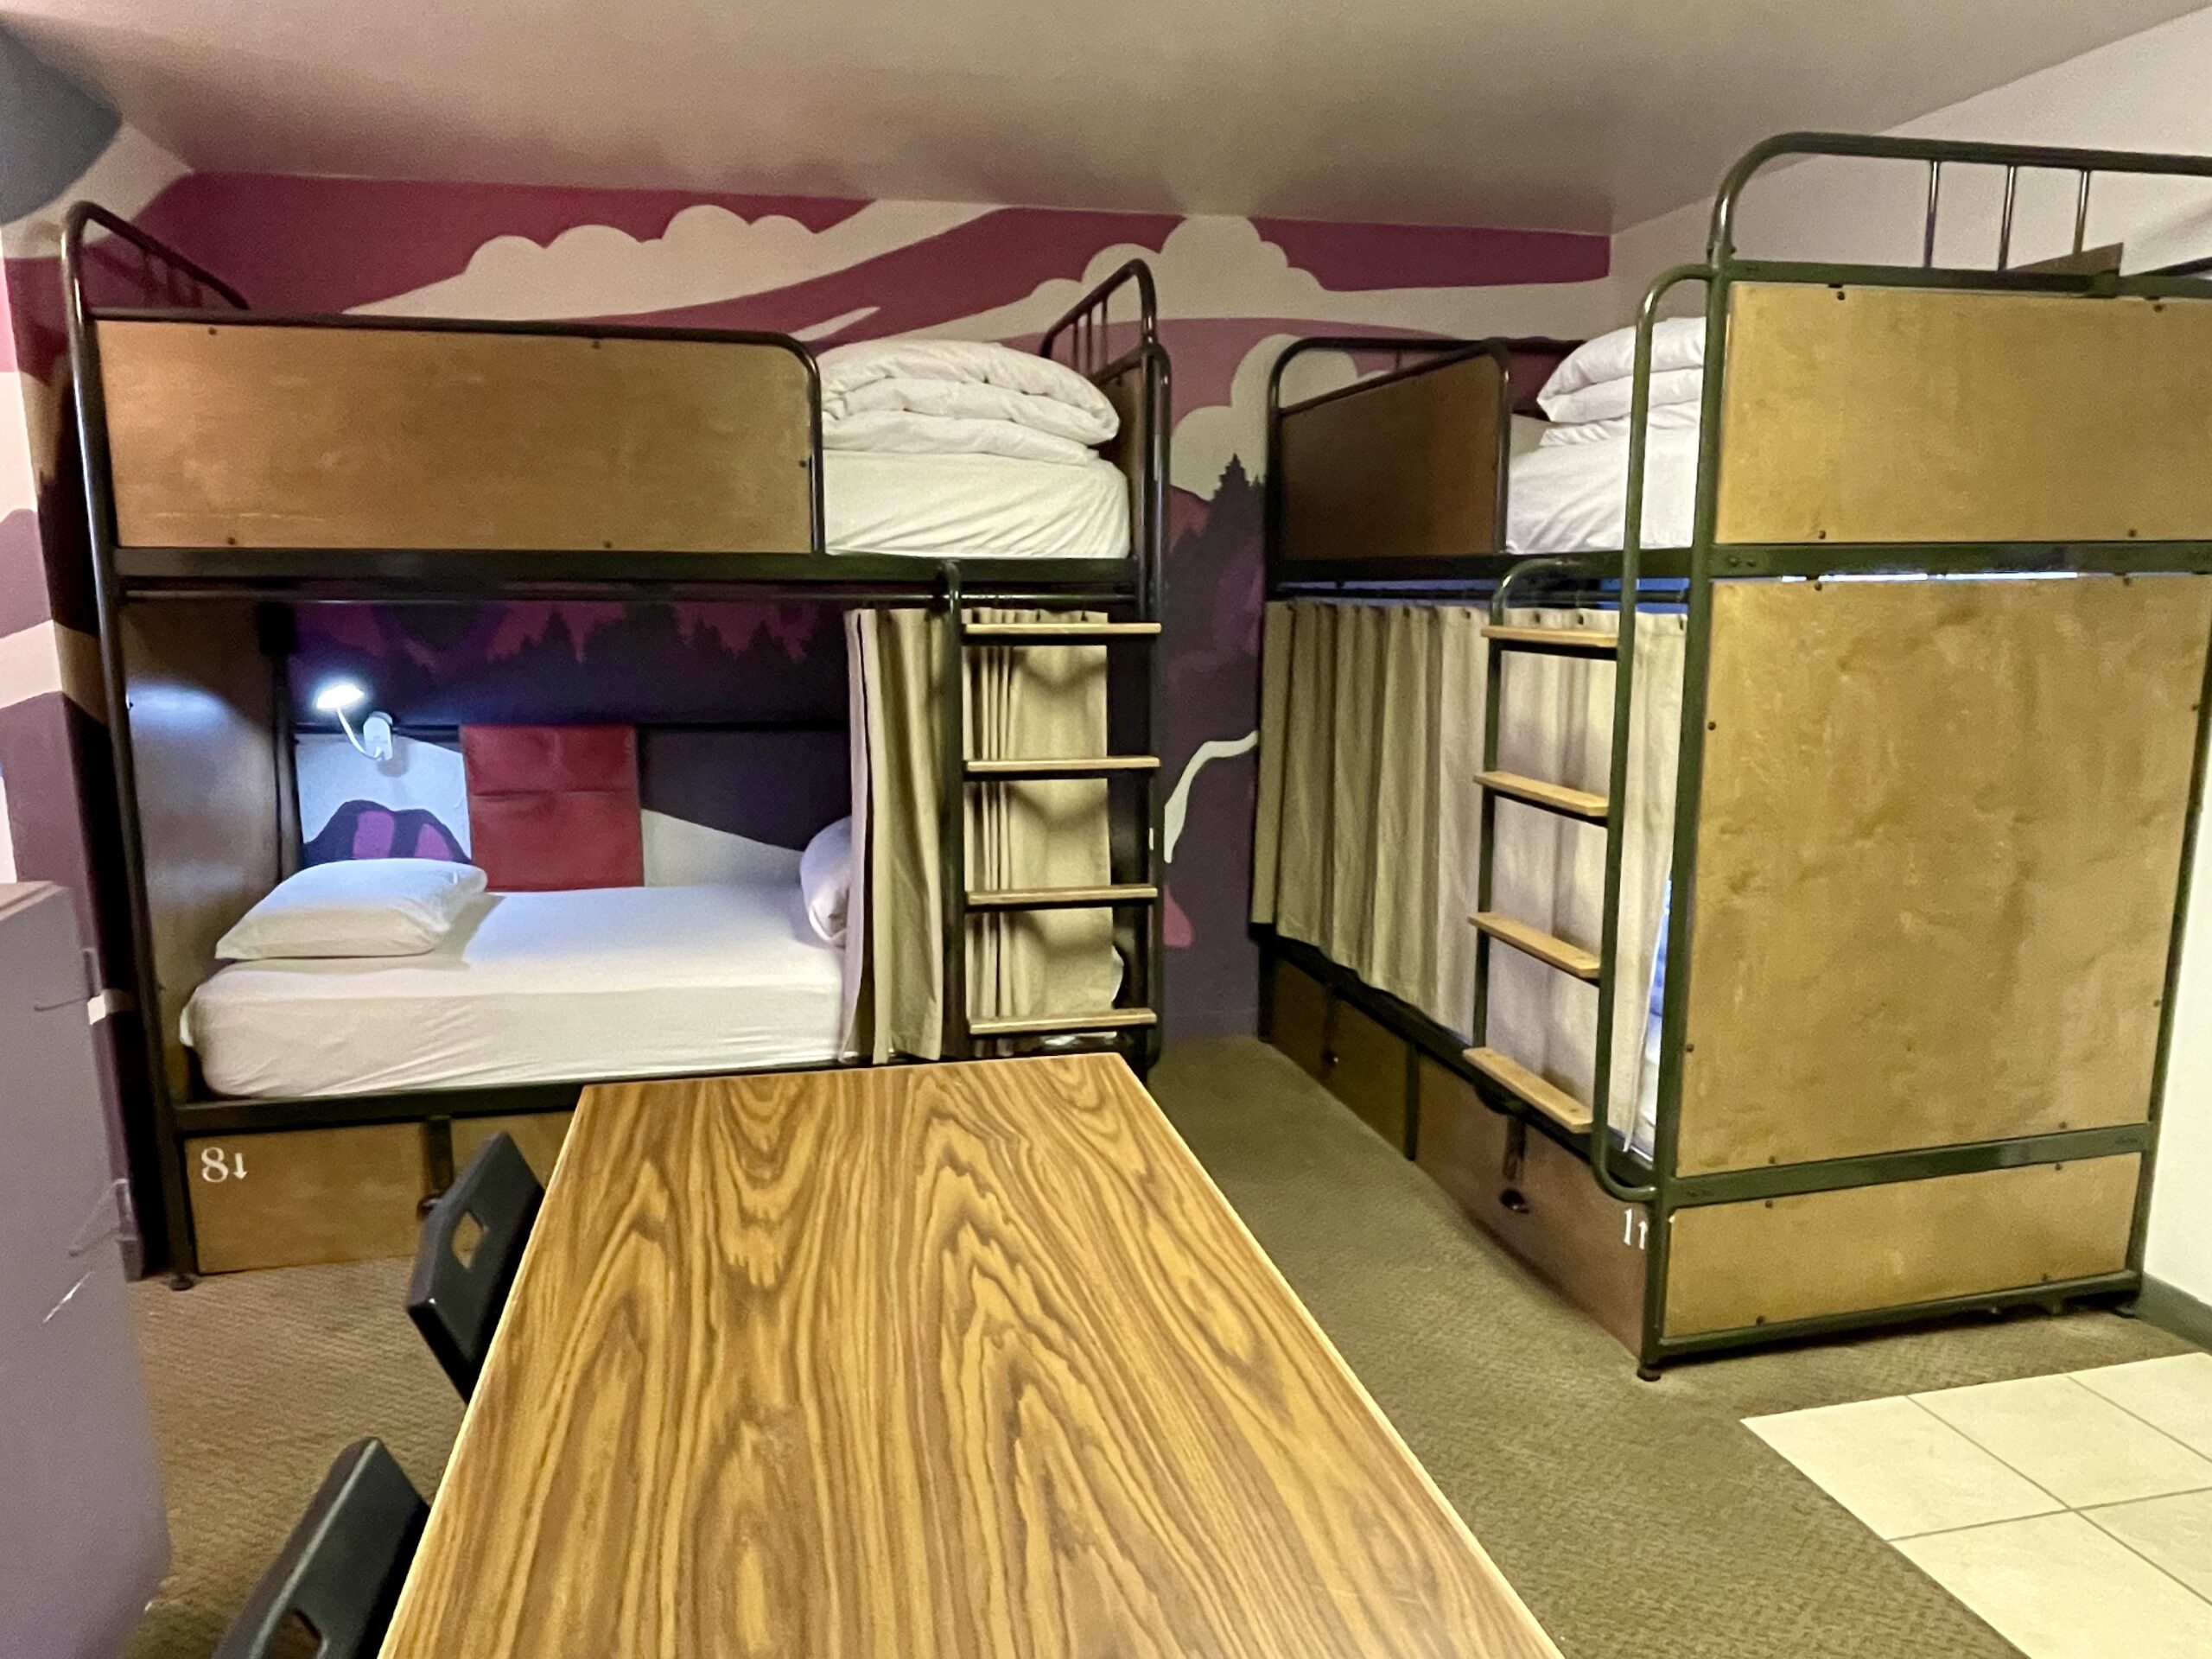 Coed Colorado hostel, with bunk beds in shared space